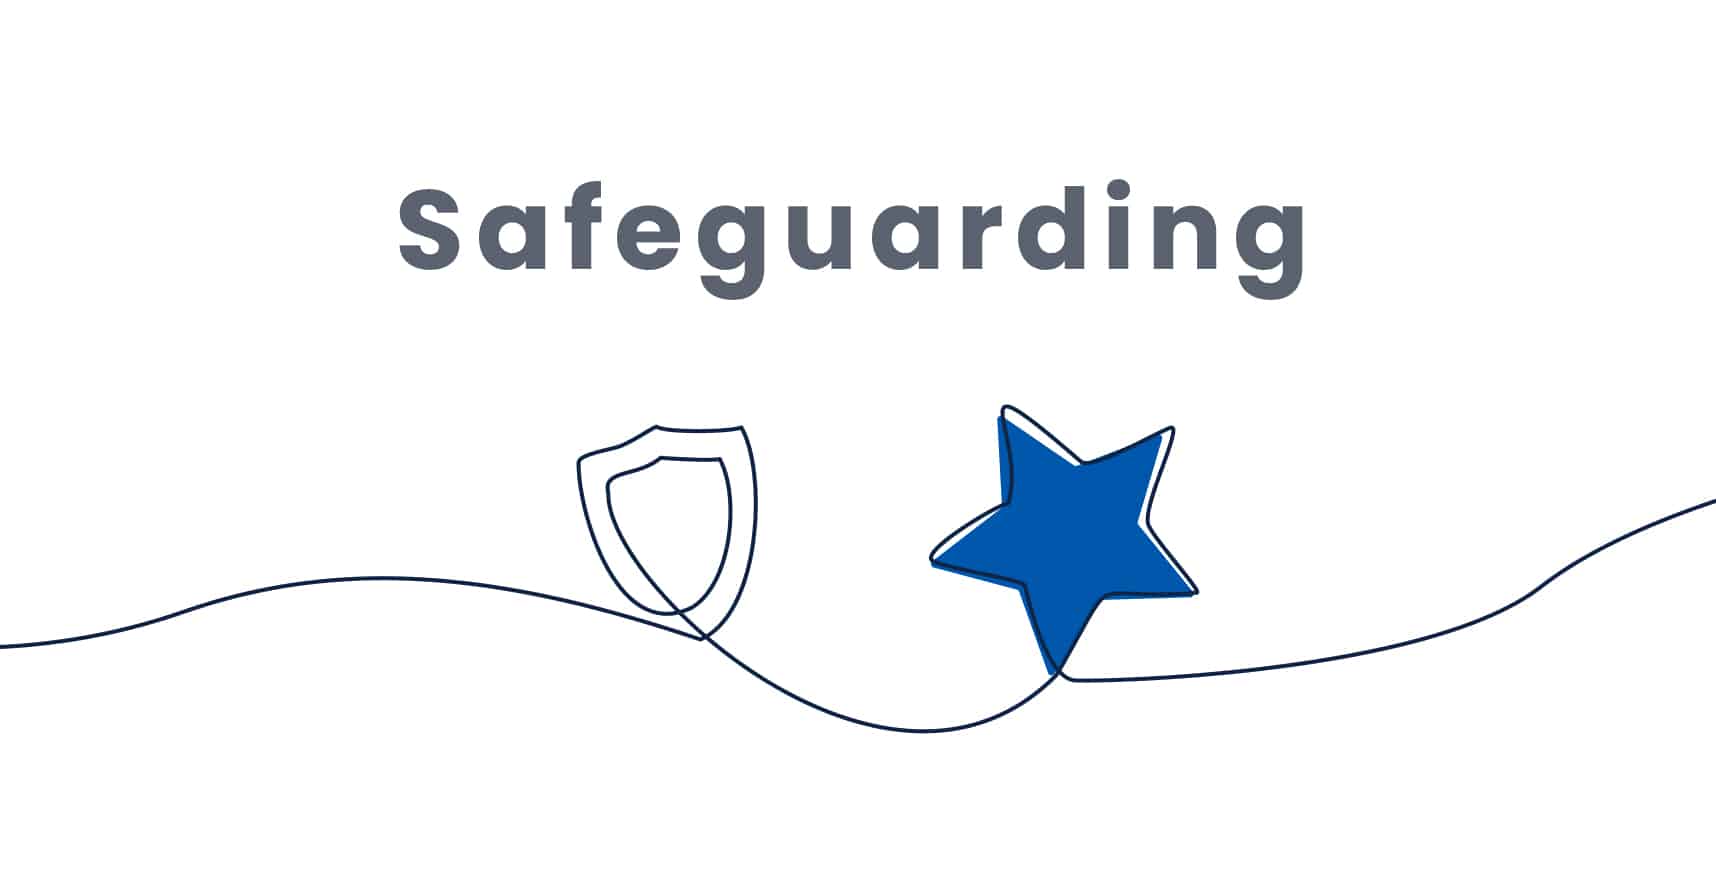 A shield icon and a blue star icon are connected by a single continuous line beneath the word "Safeguarding" on a white background.